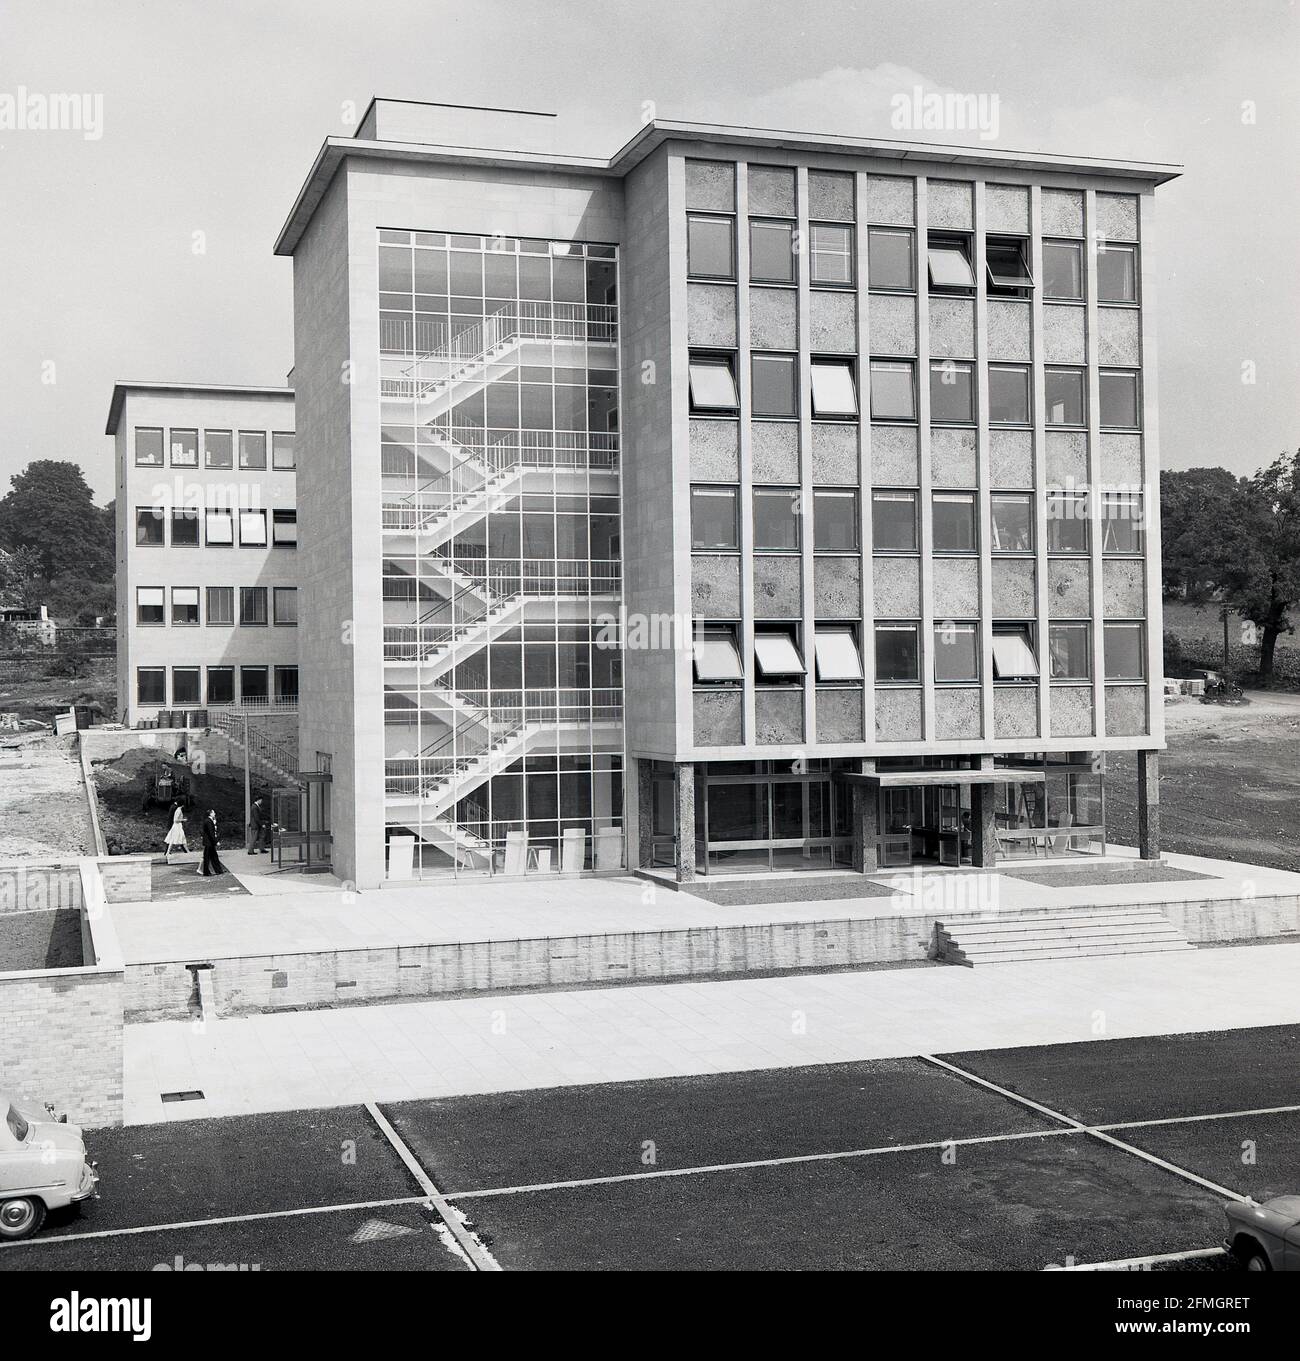 1960s, historical, a newly built head office premises, quite typical of the era's architecture having been built using precast concrete panels with windows already in place, these panels having been built off-site, England, UK. Interesting enough the staircase for the building can be seen, a recent innovation. Stock Photo